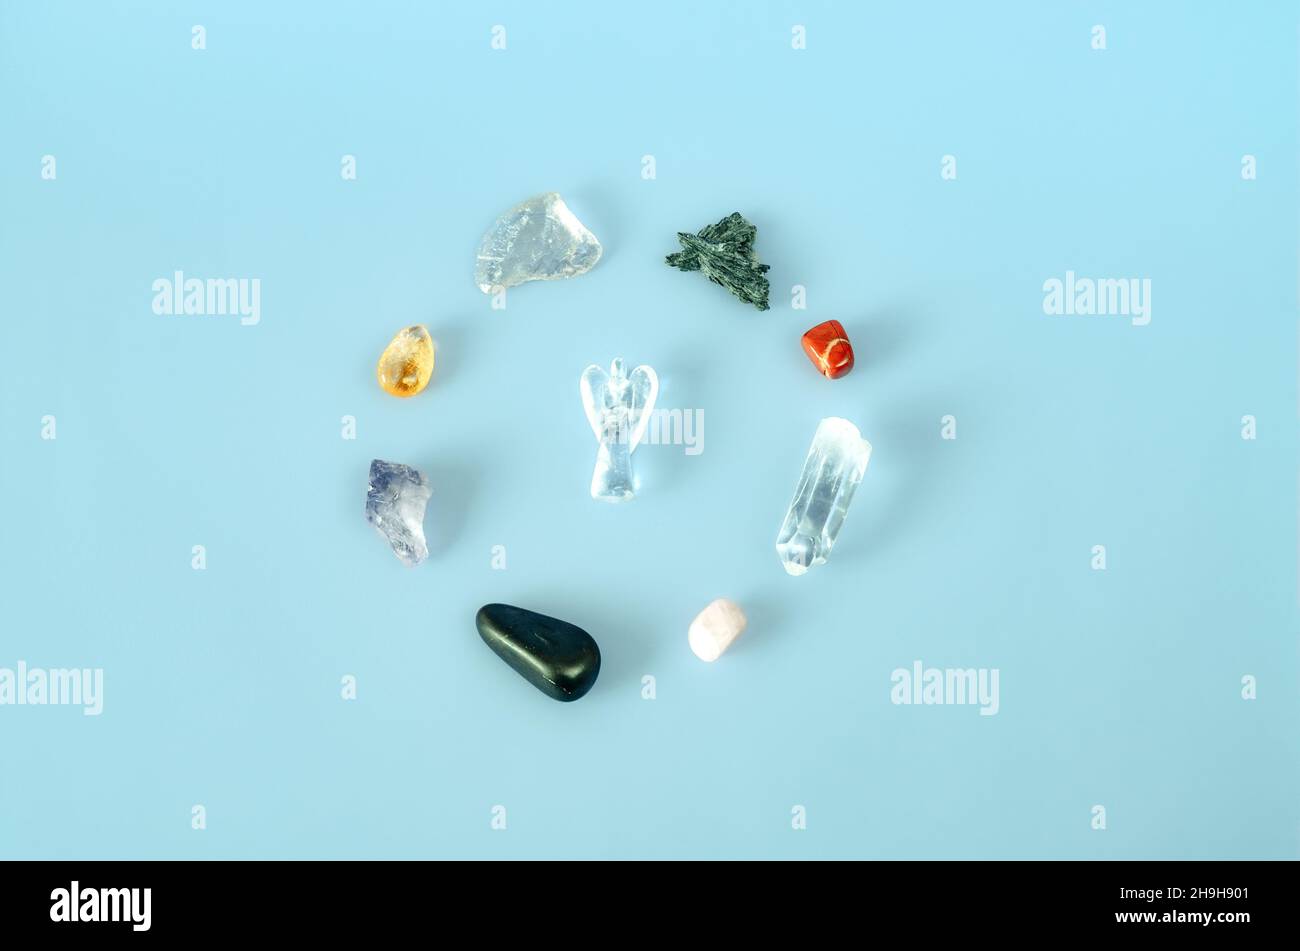 Minimalist flat lay of healing crystals circle with angel in the middle on blue background Stock Photo